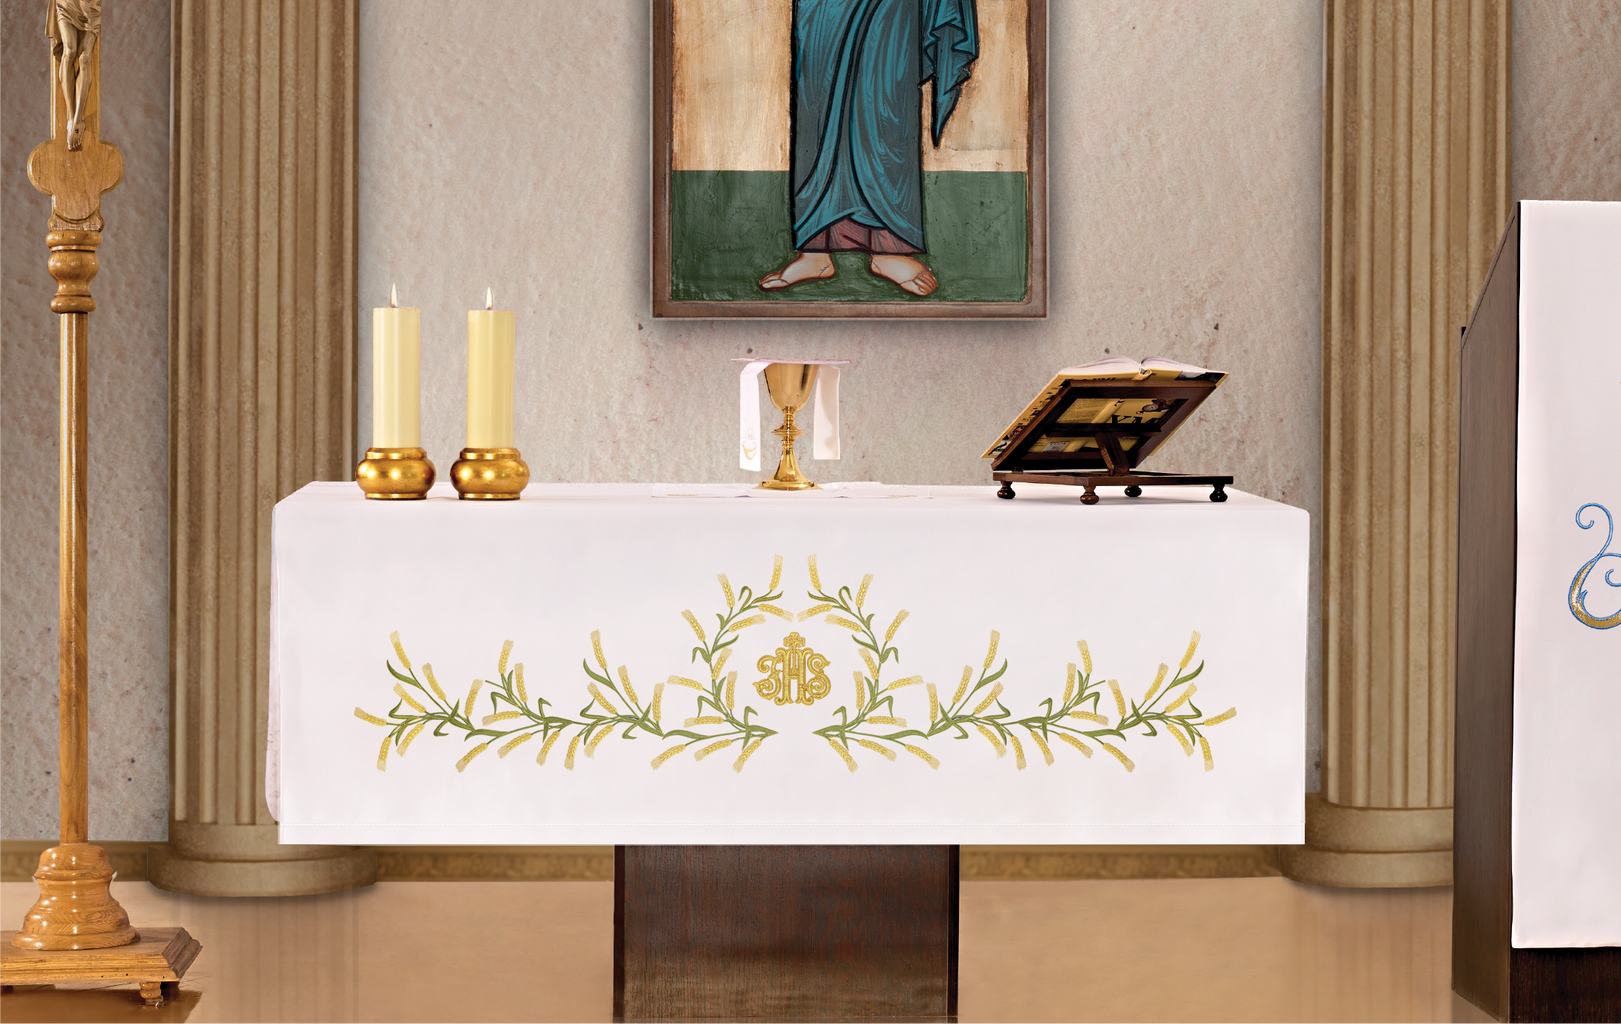 Altar tablecloth with wheat and cross embroidery